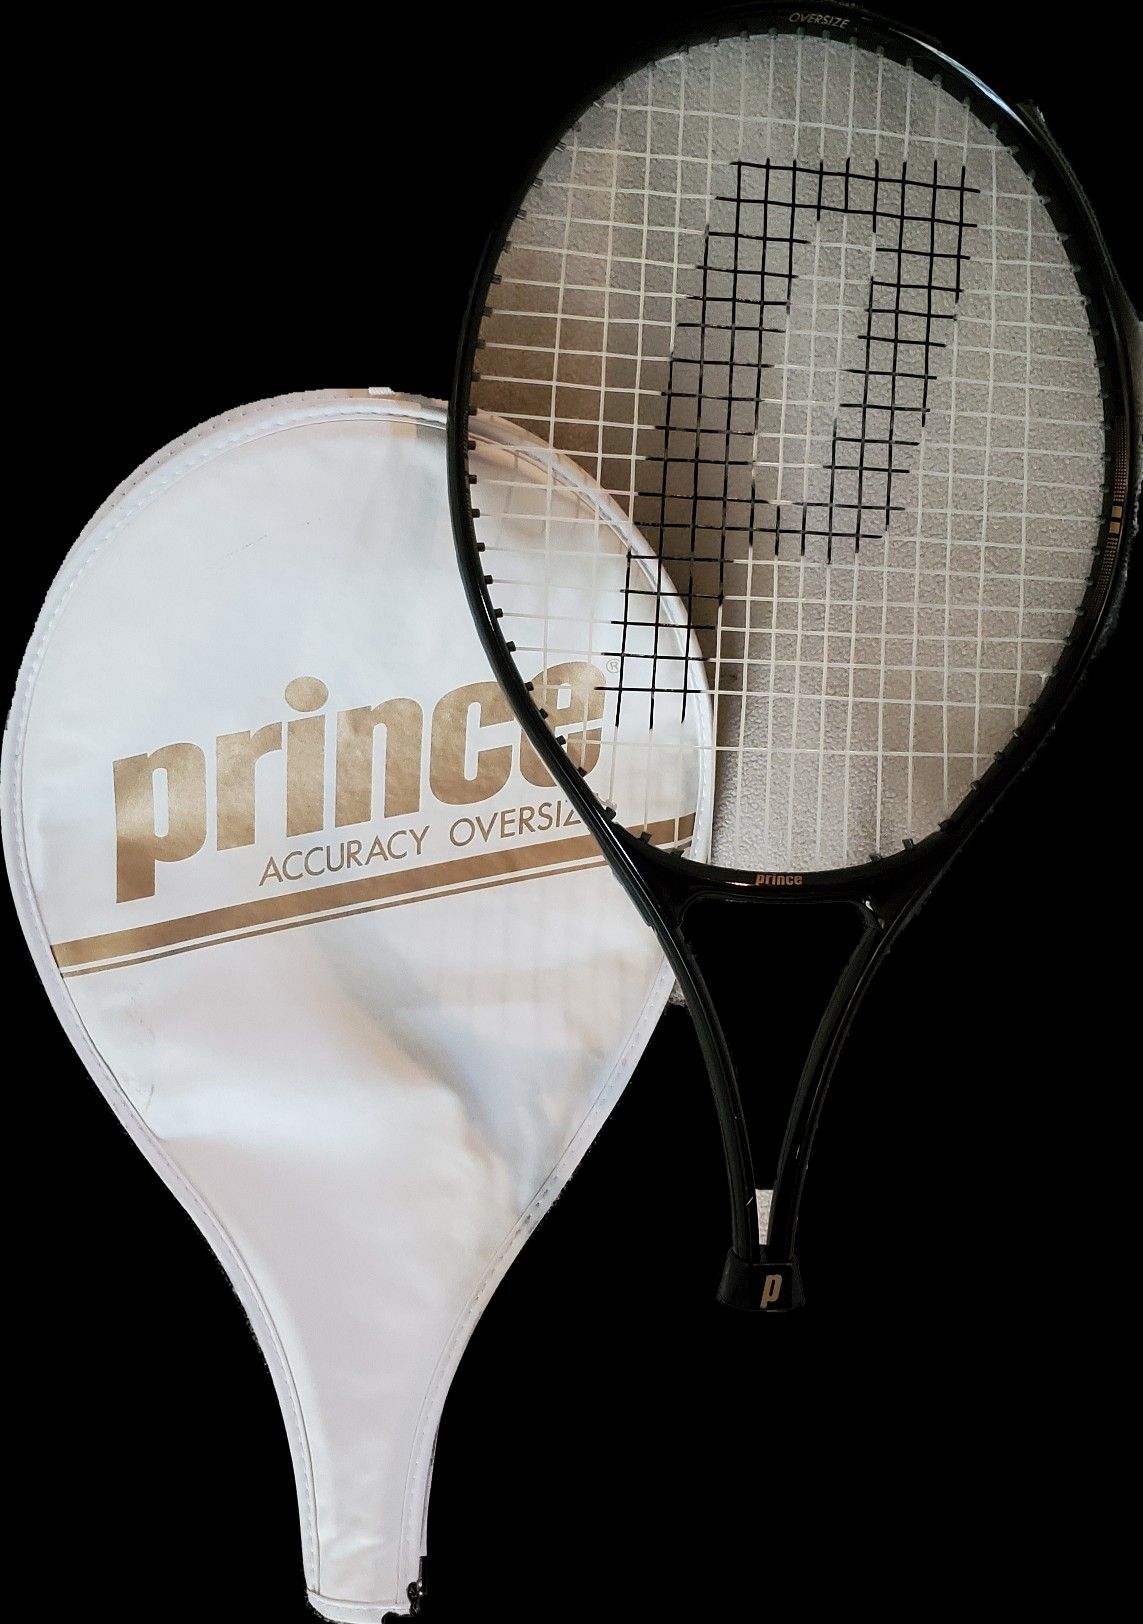 Vintage Prince Accuracy Oversized Tennis Racket with case and balls